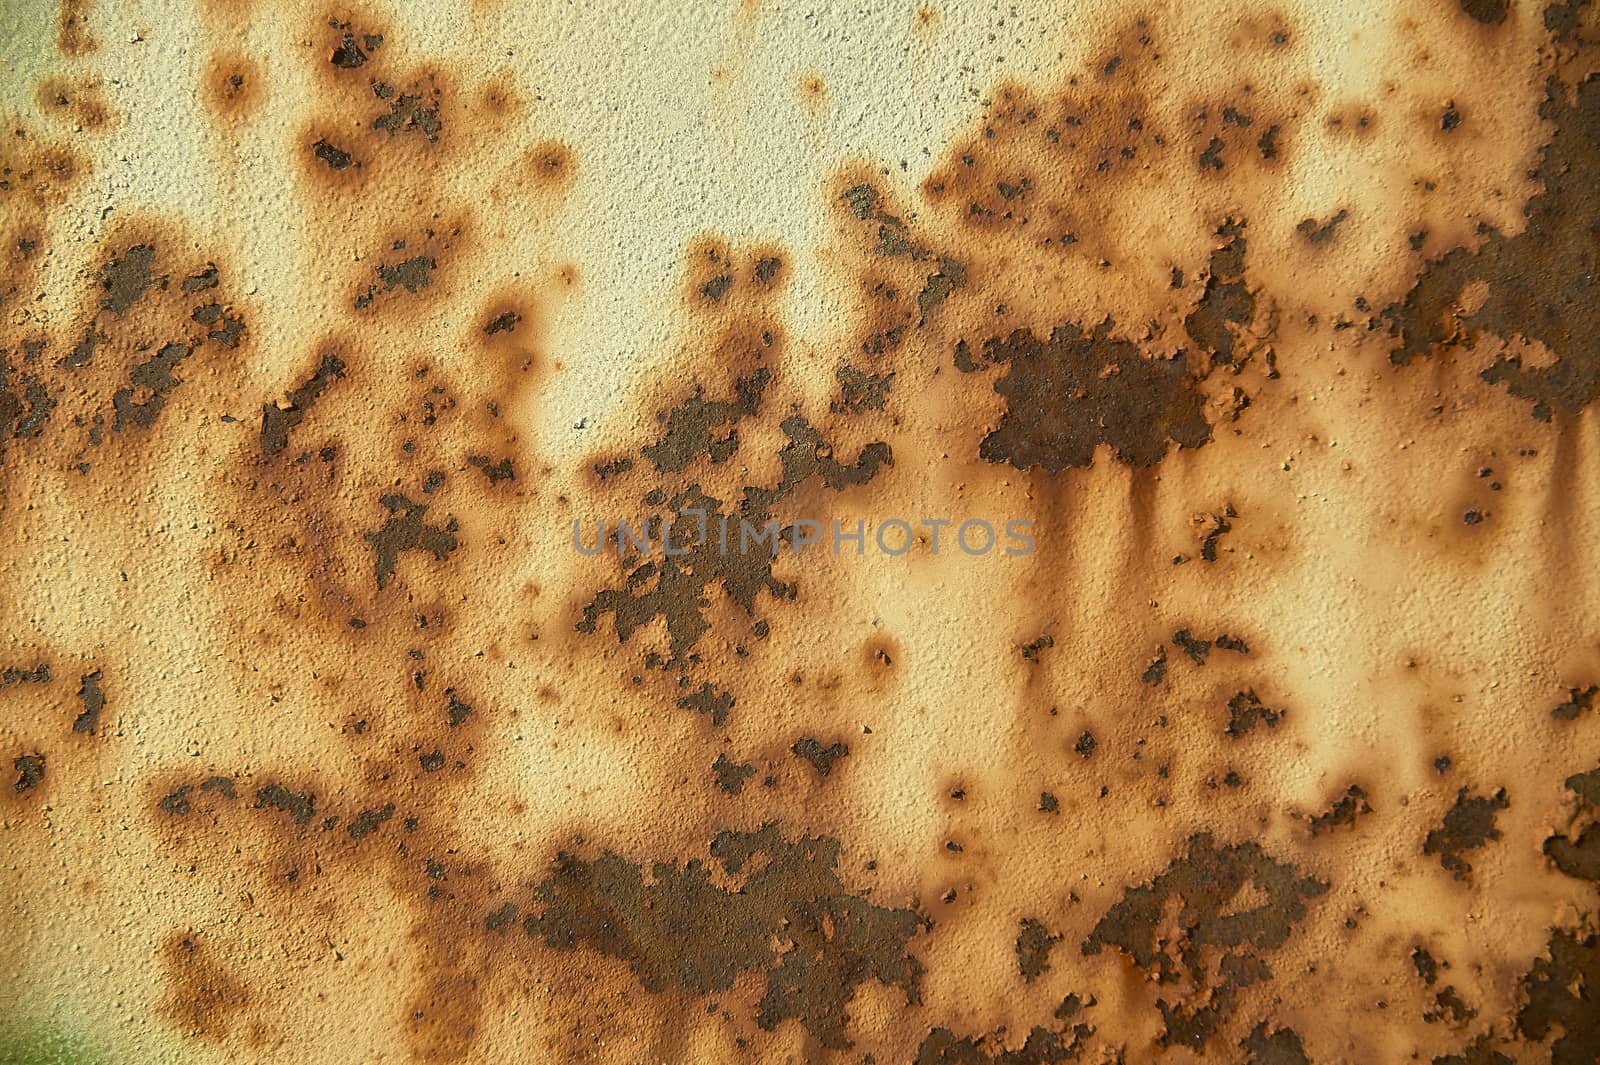 High definition texture of a rusty, weathered ferrous surface.